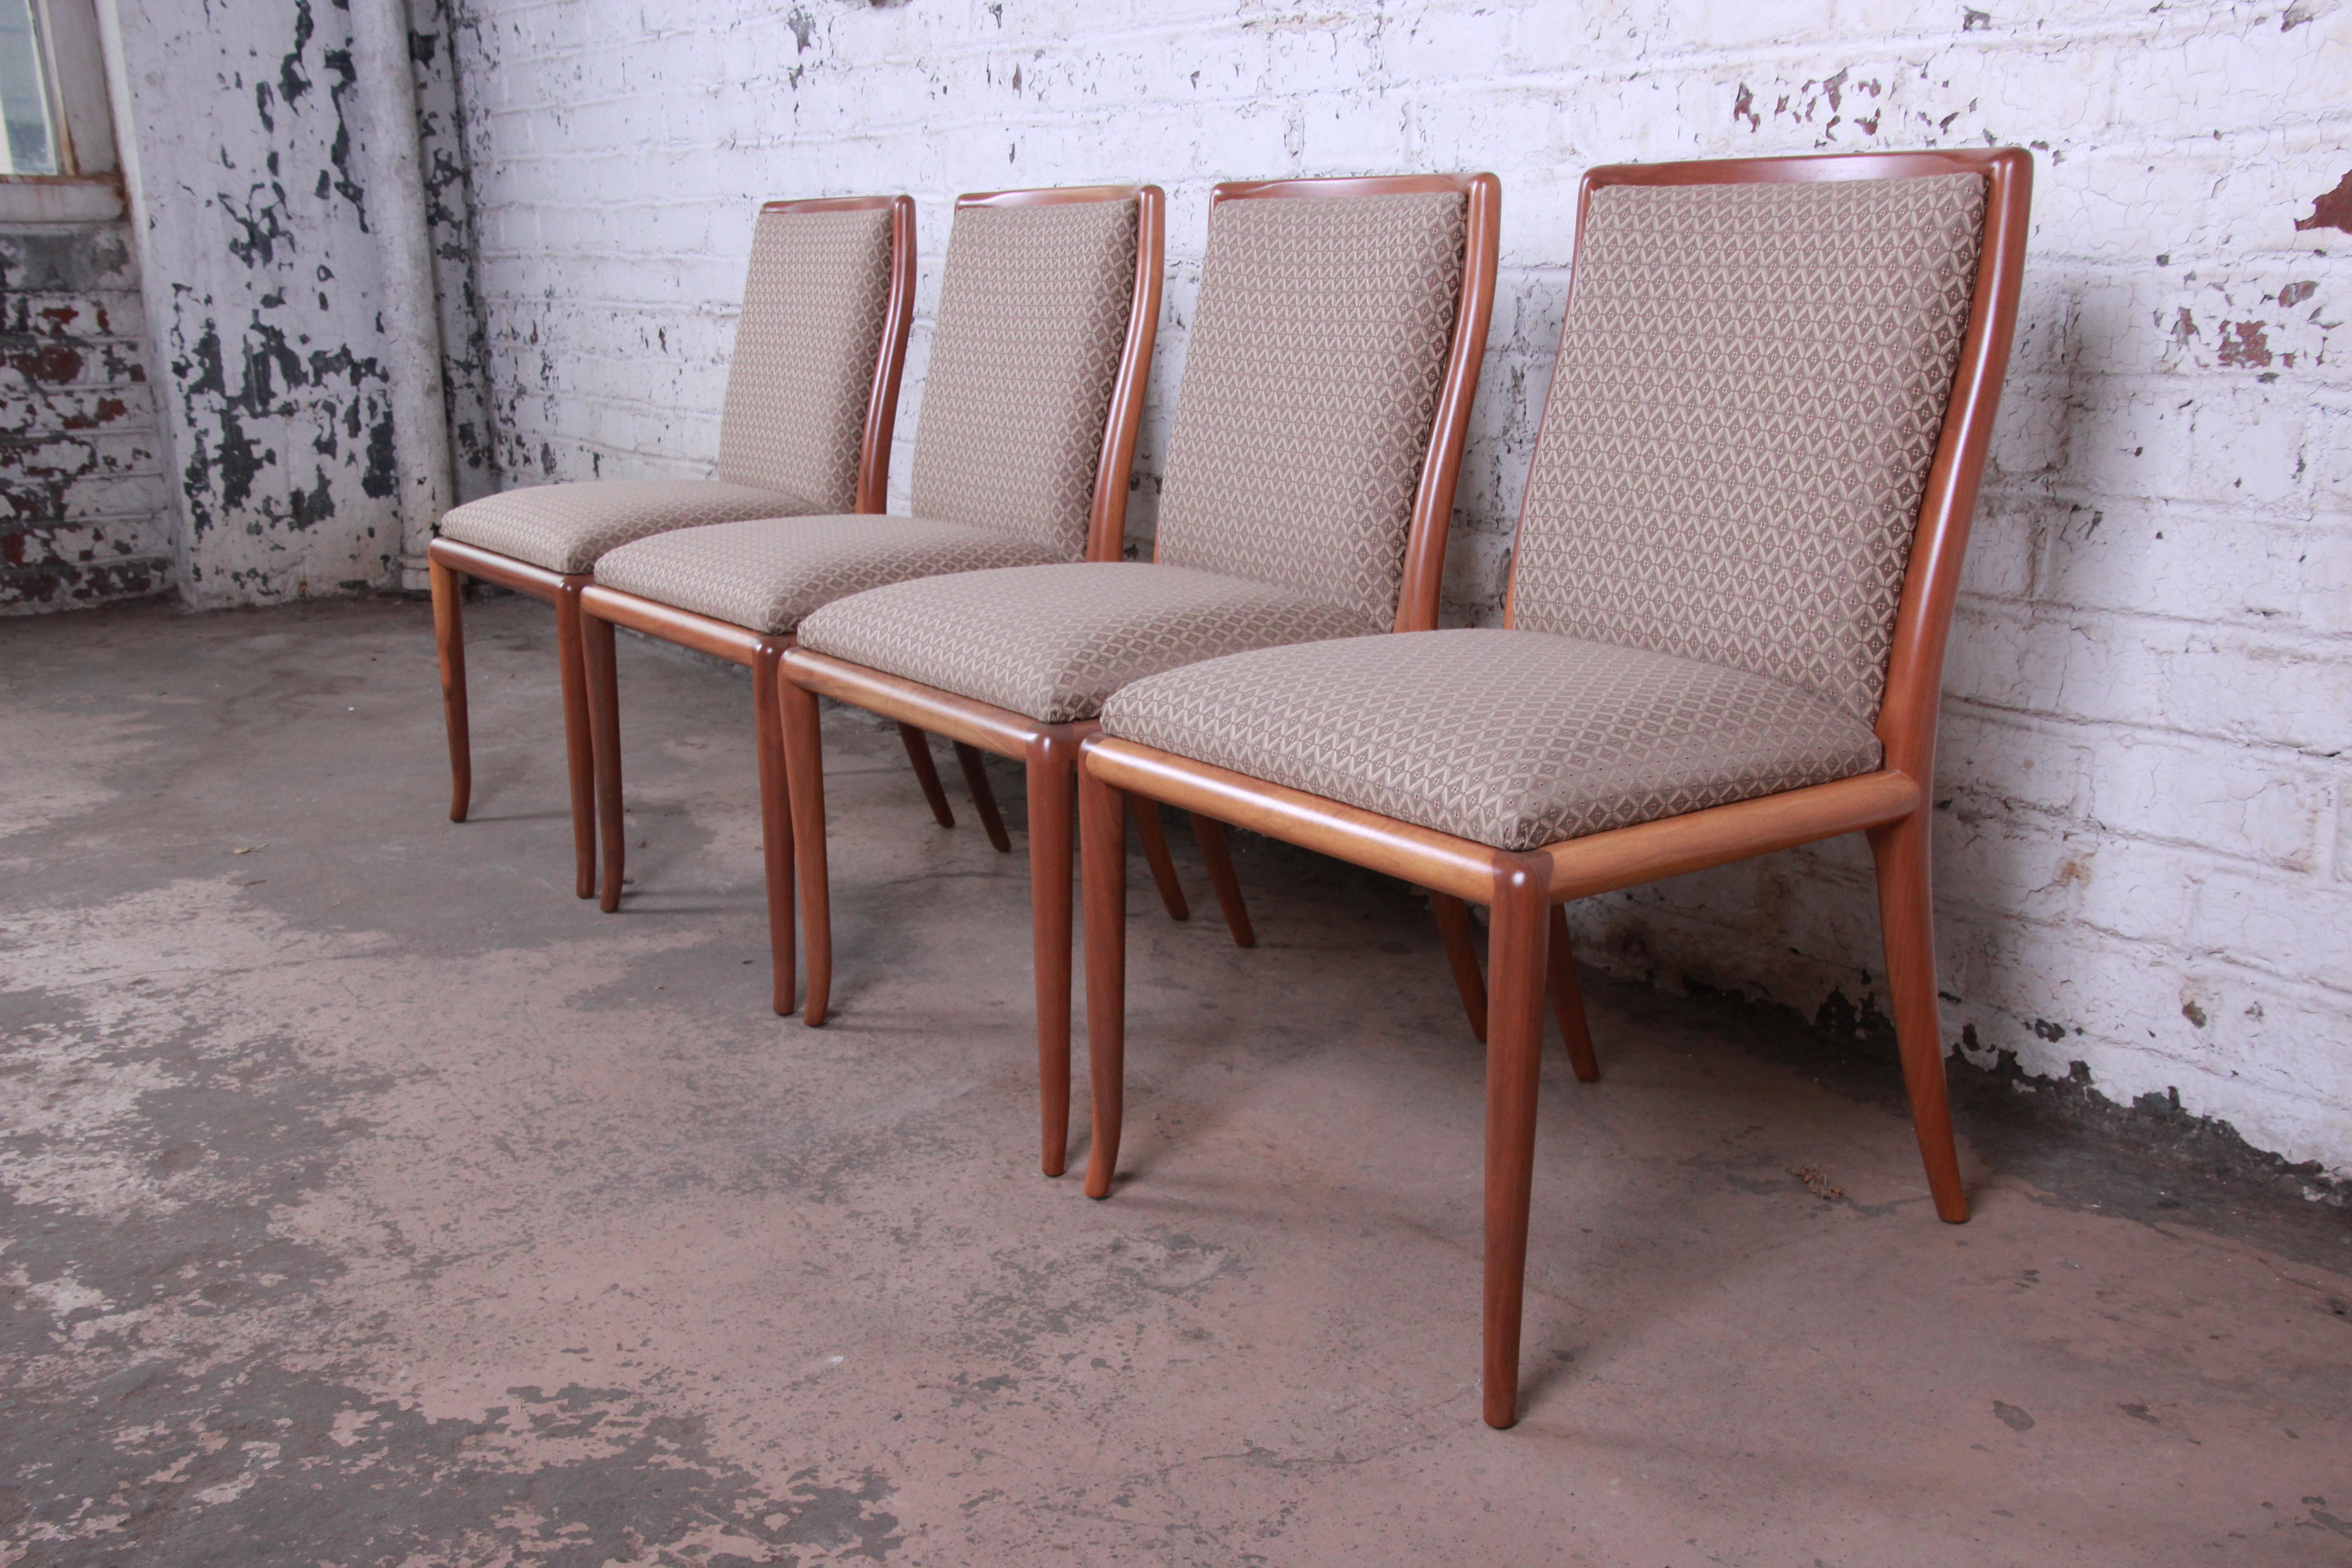 An outstanding set of four Mid-Century Modern saber leg dining chairs designed by T.H. Robsjohn-Gibbings for Widdicomb. The chairs feature gorgeous sculpted solid walnut frames with a unique saber leg design. The beige and red upholstery is clean